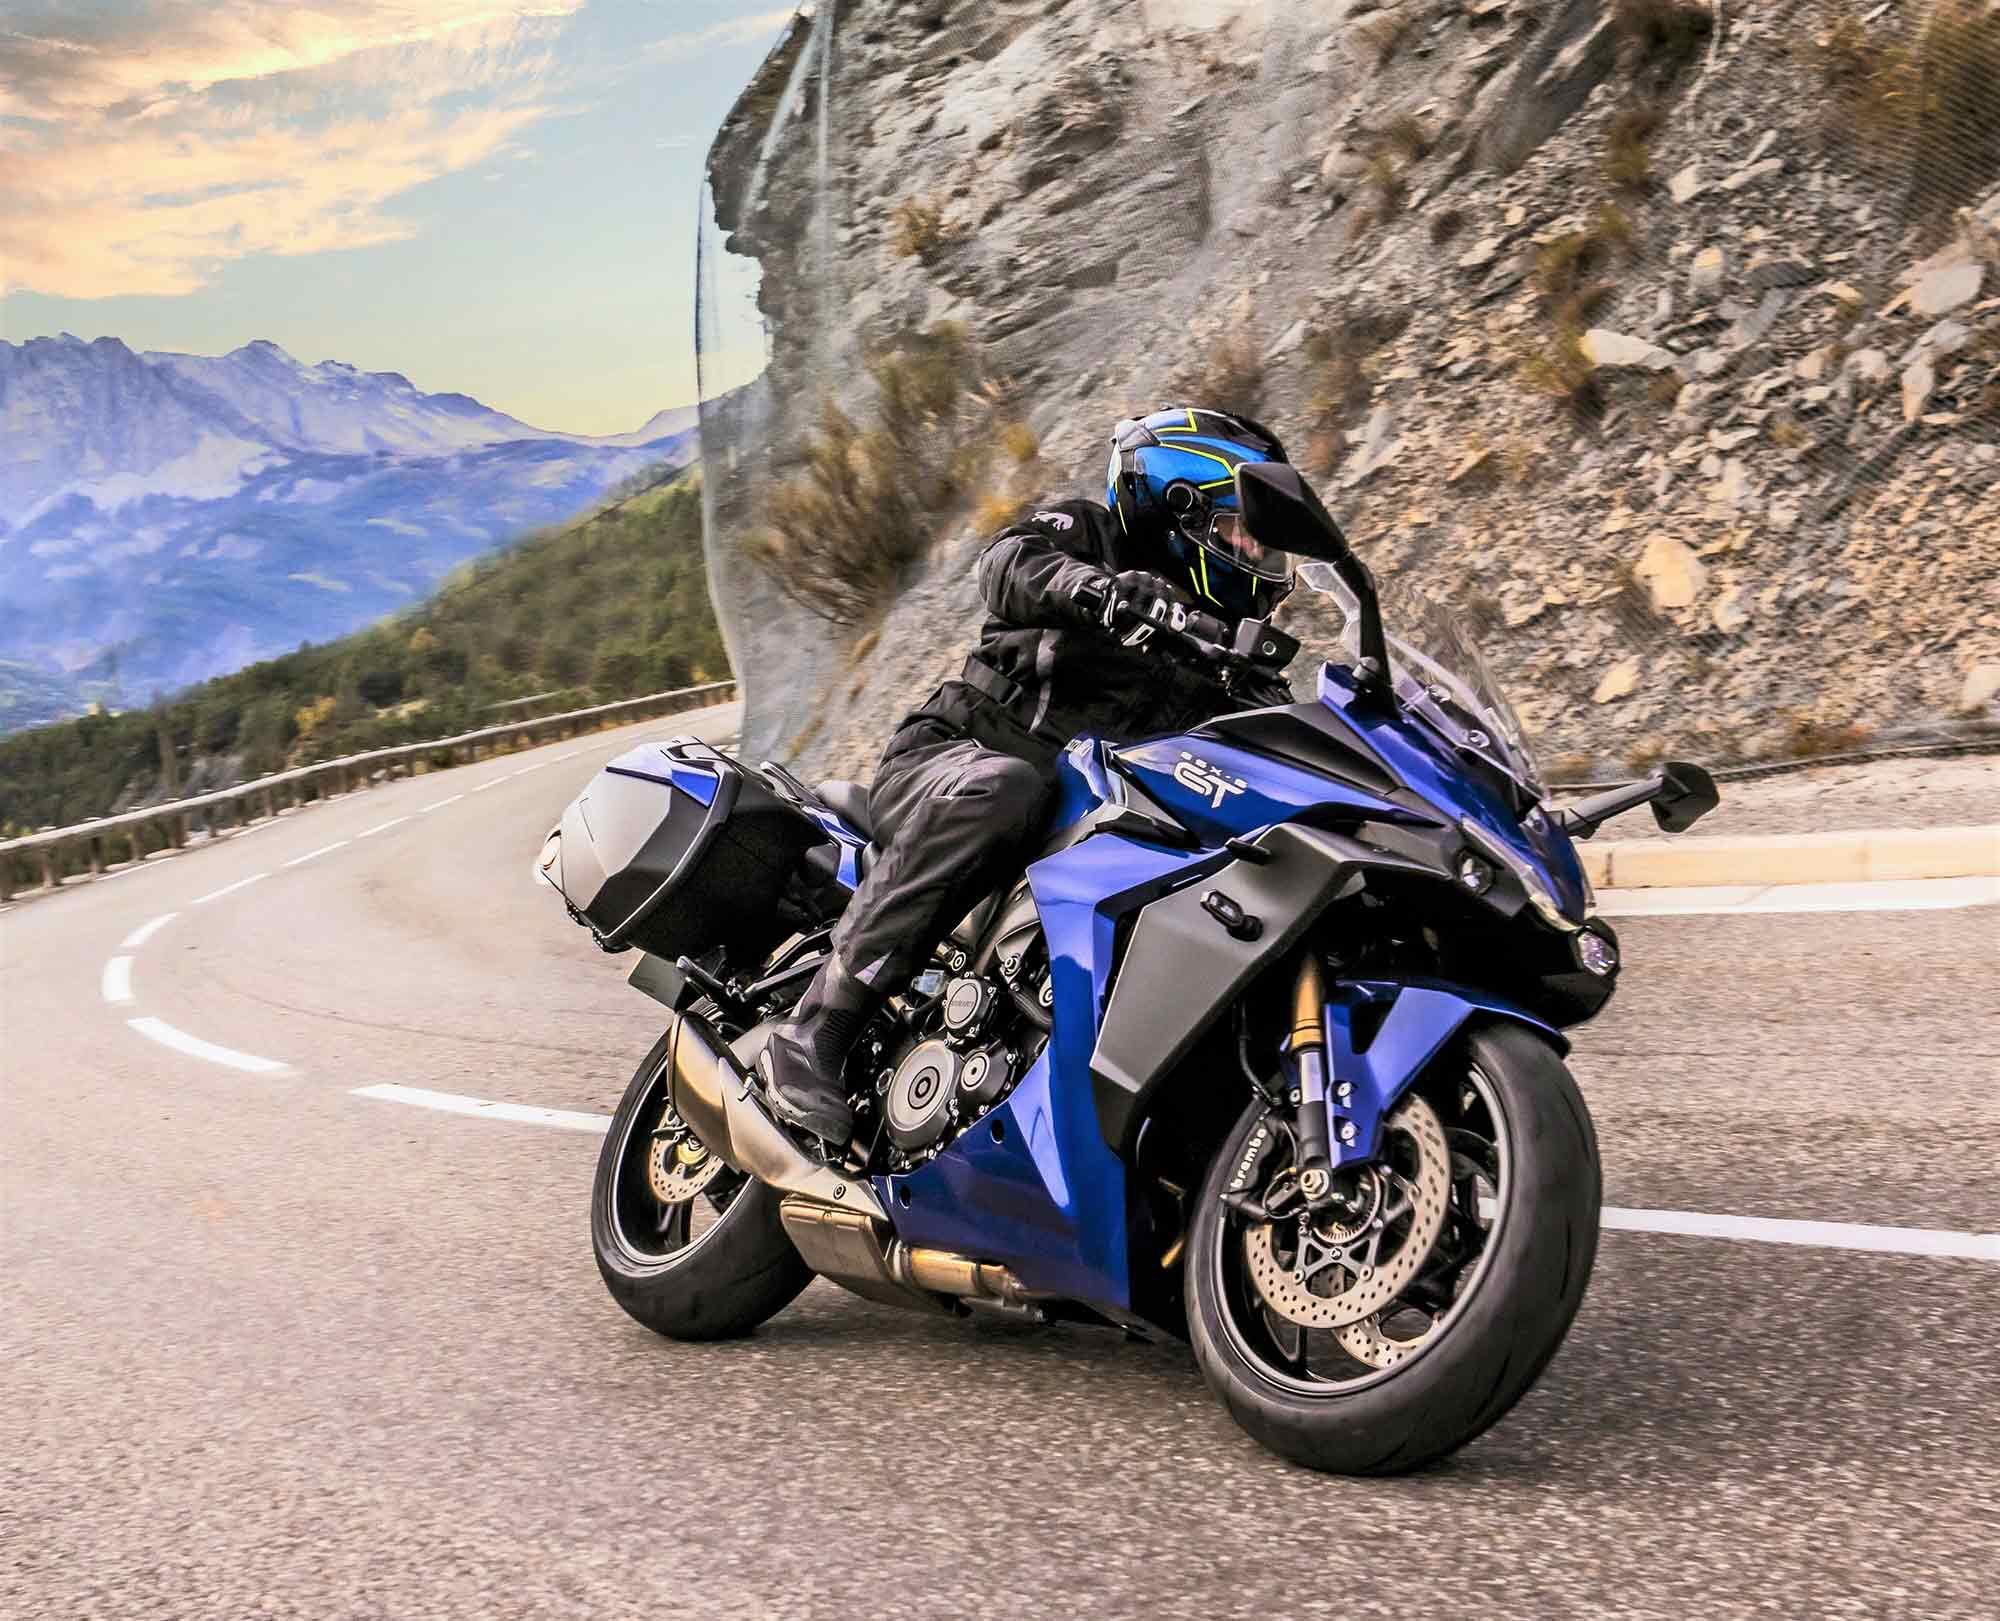 Suzuki has released the new GSX-S1000GT for the 2022 model year. The new sport-tourer reflects styling from the GSX-S1000 launched earlier this year, adding a tall shield, a fairing, and a longer seat.